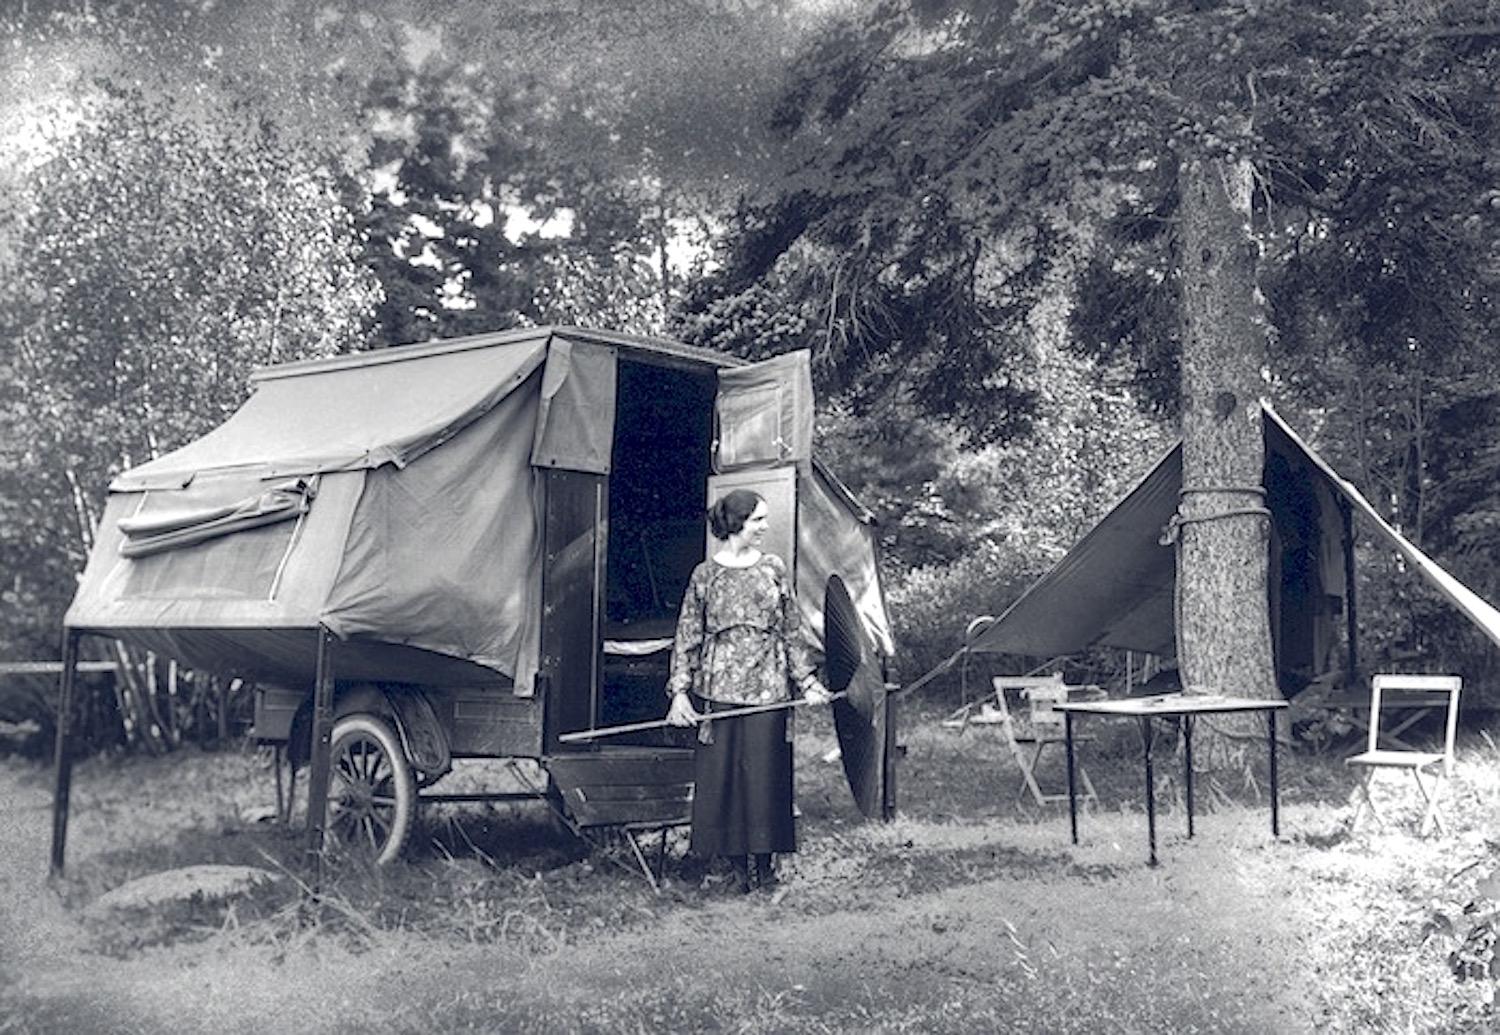 Increased interest in RVs, and bigger RVs, are putting pressure on national park campgrounds/NPS archives